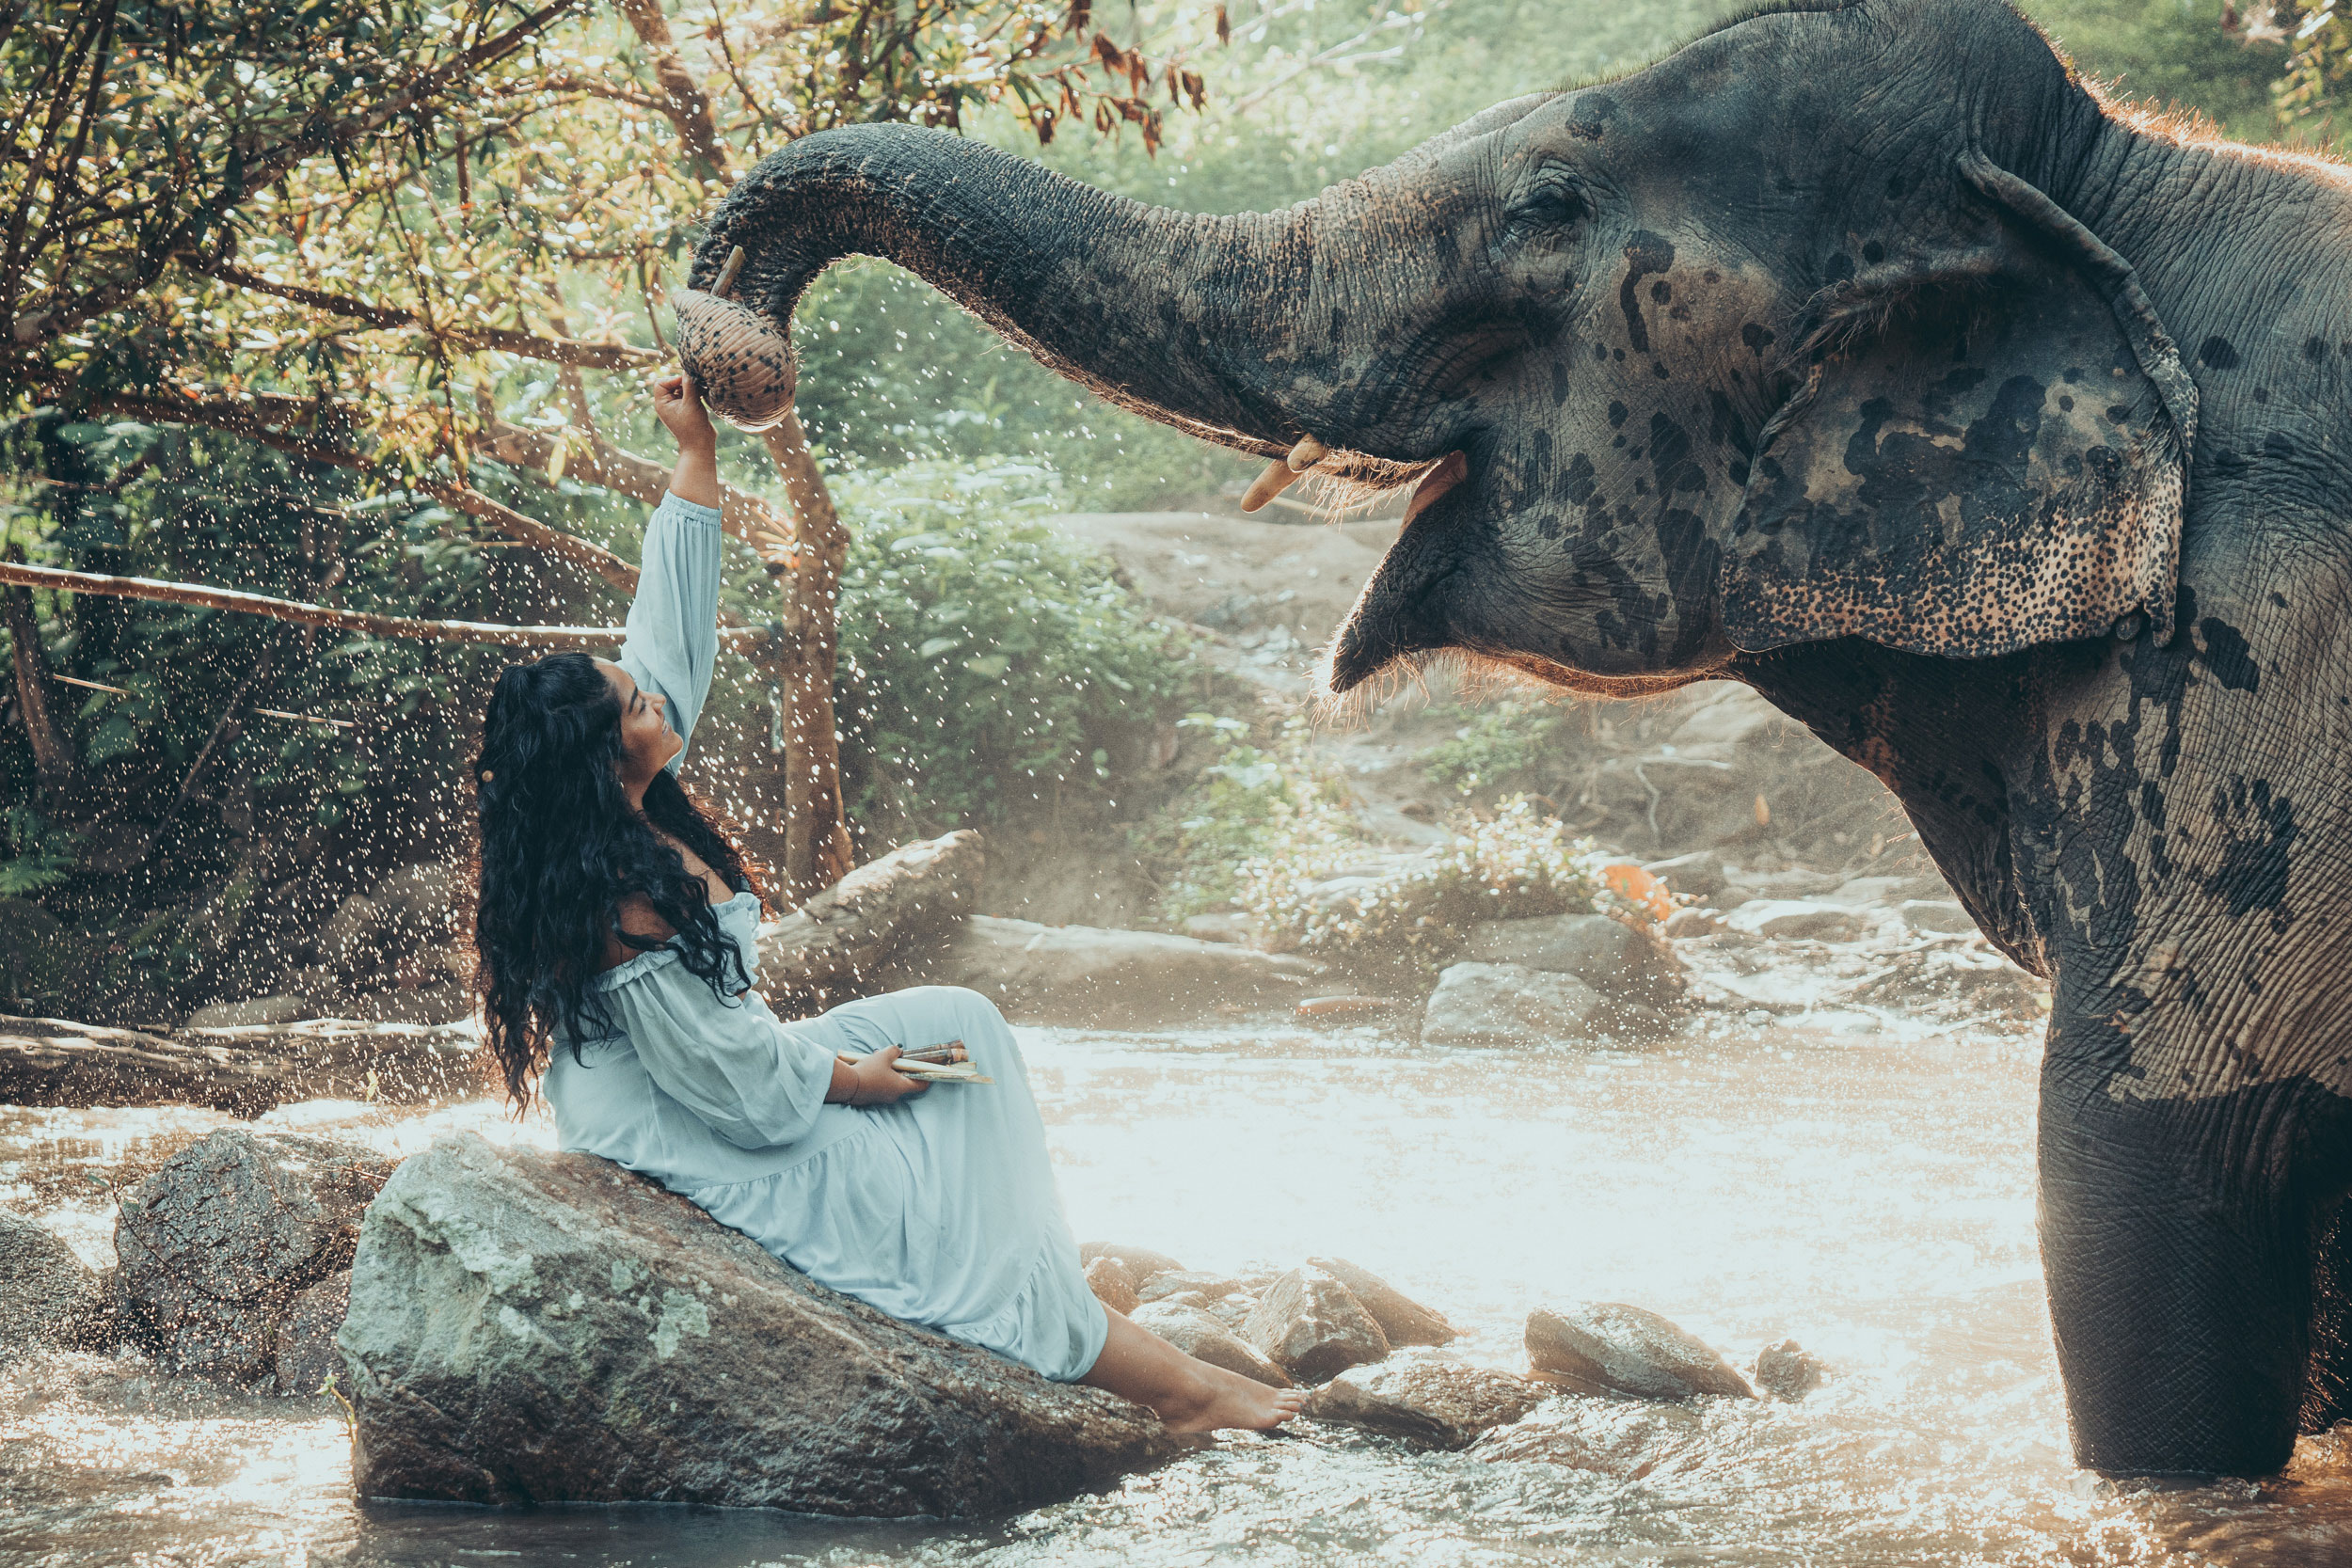 In the river with an elephant